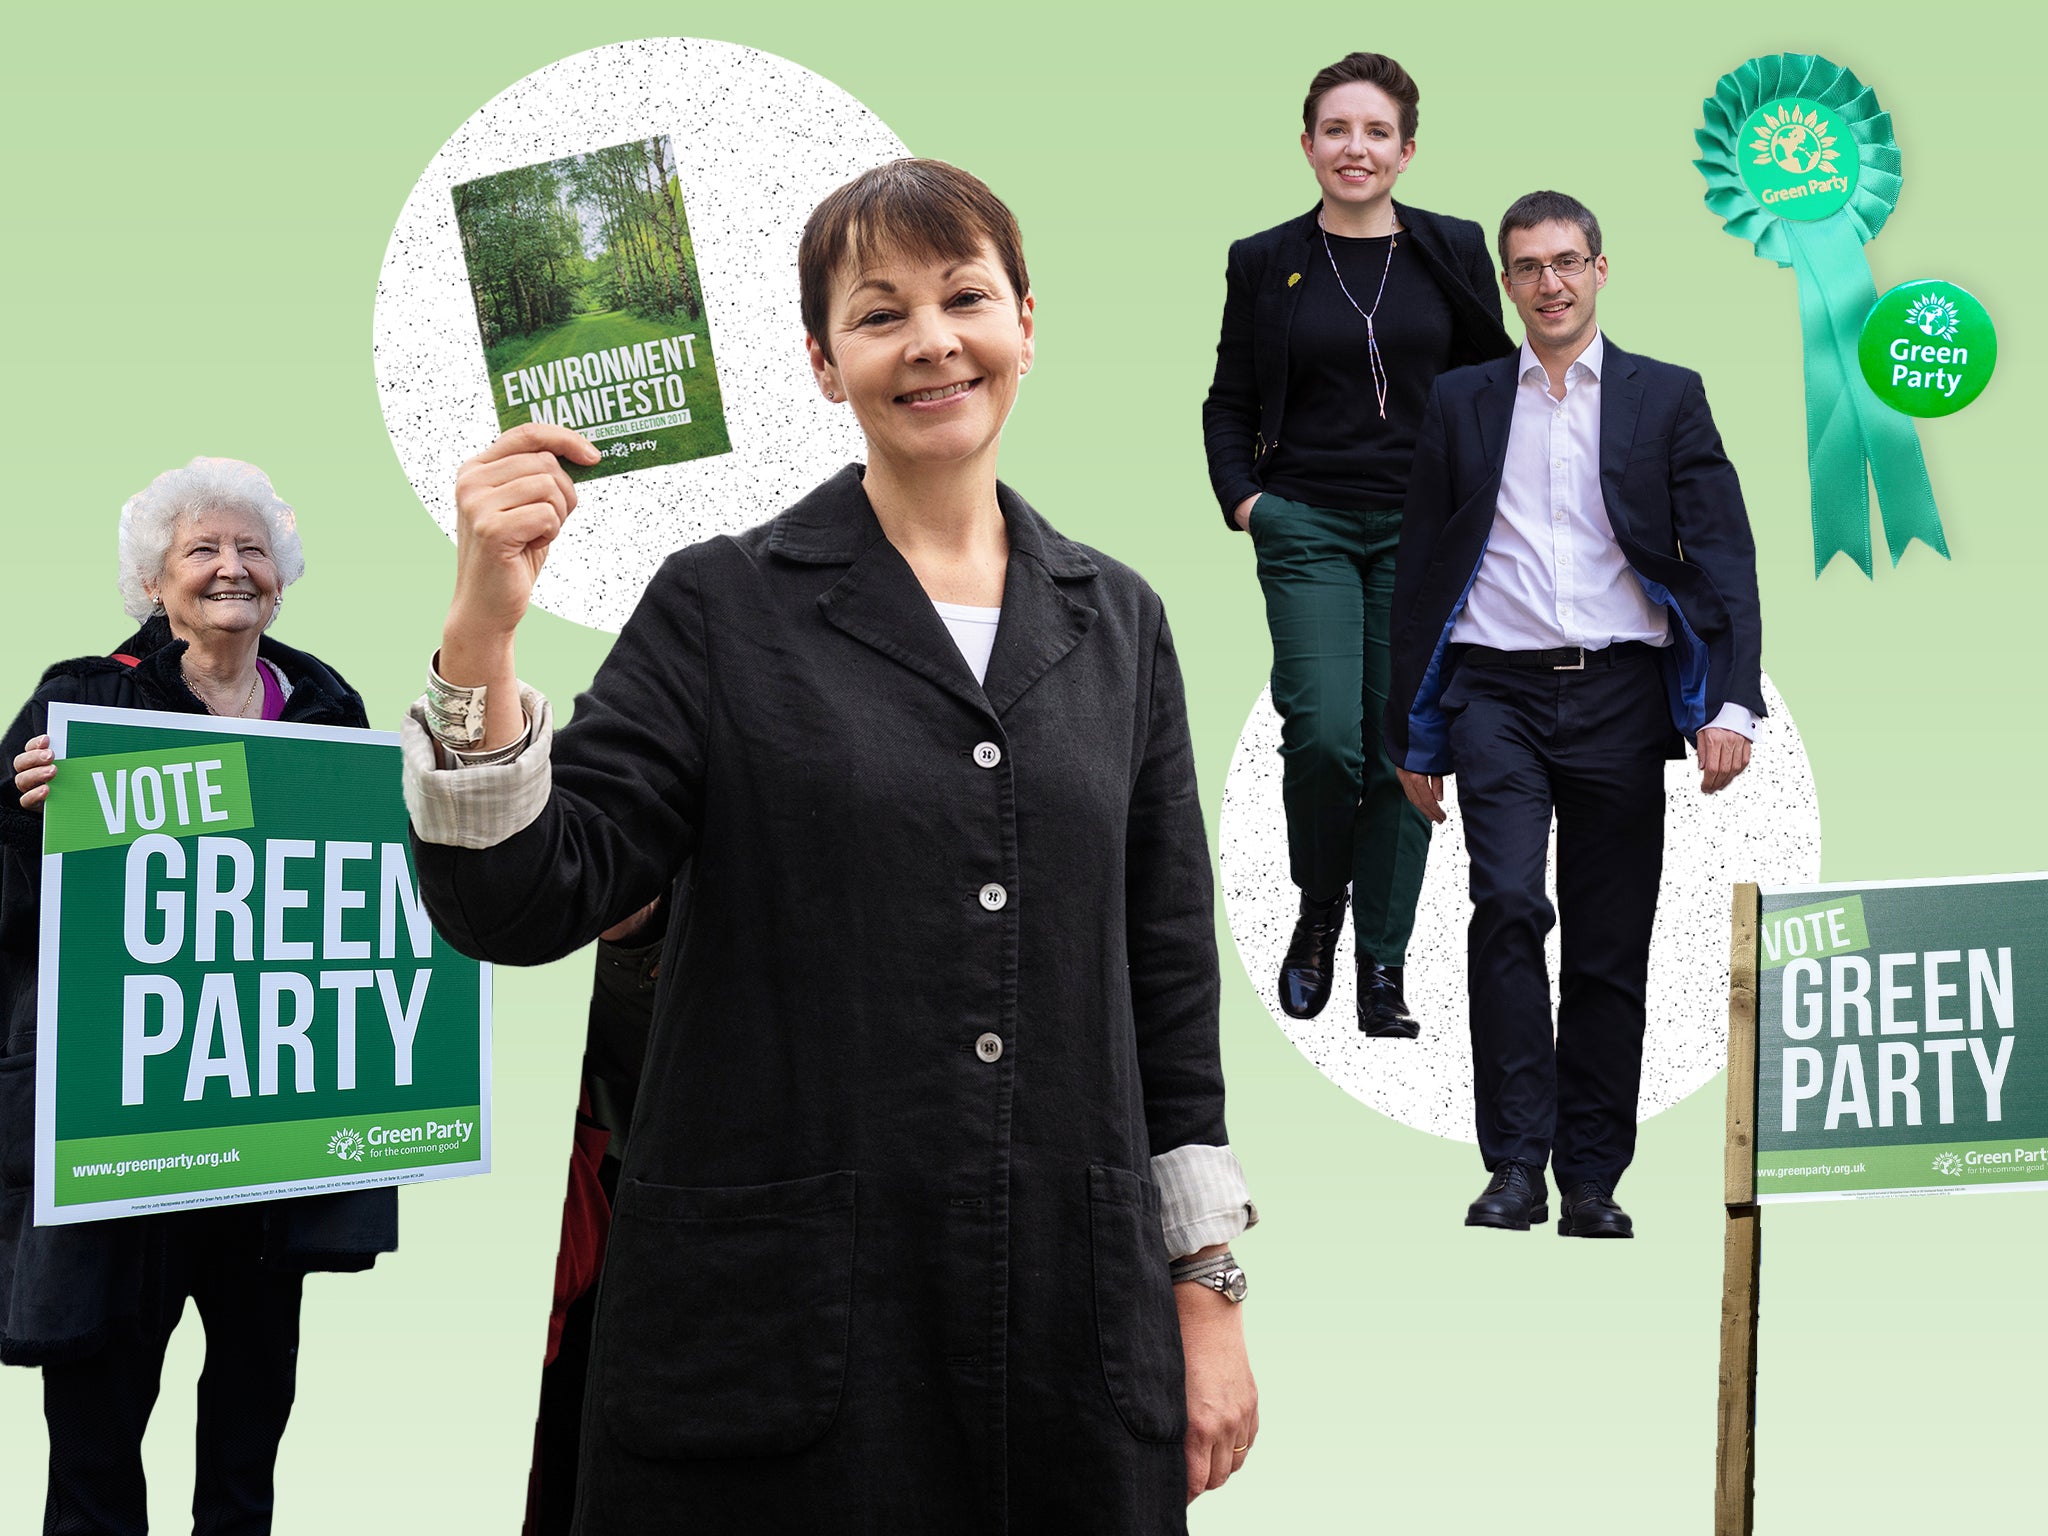 The Green’s are hoping their local election success will translate into a General Election